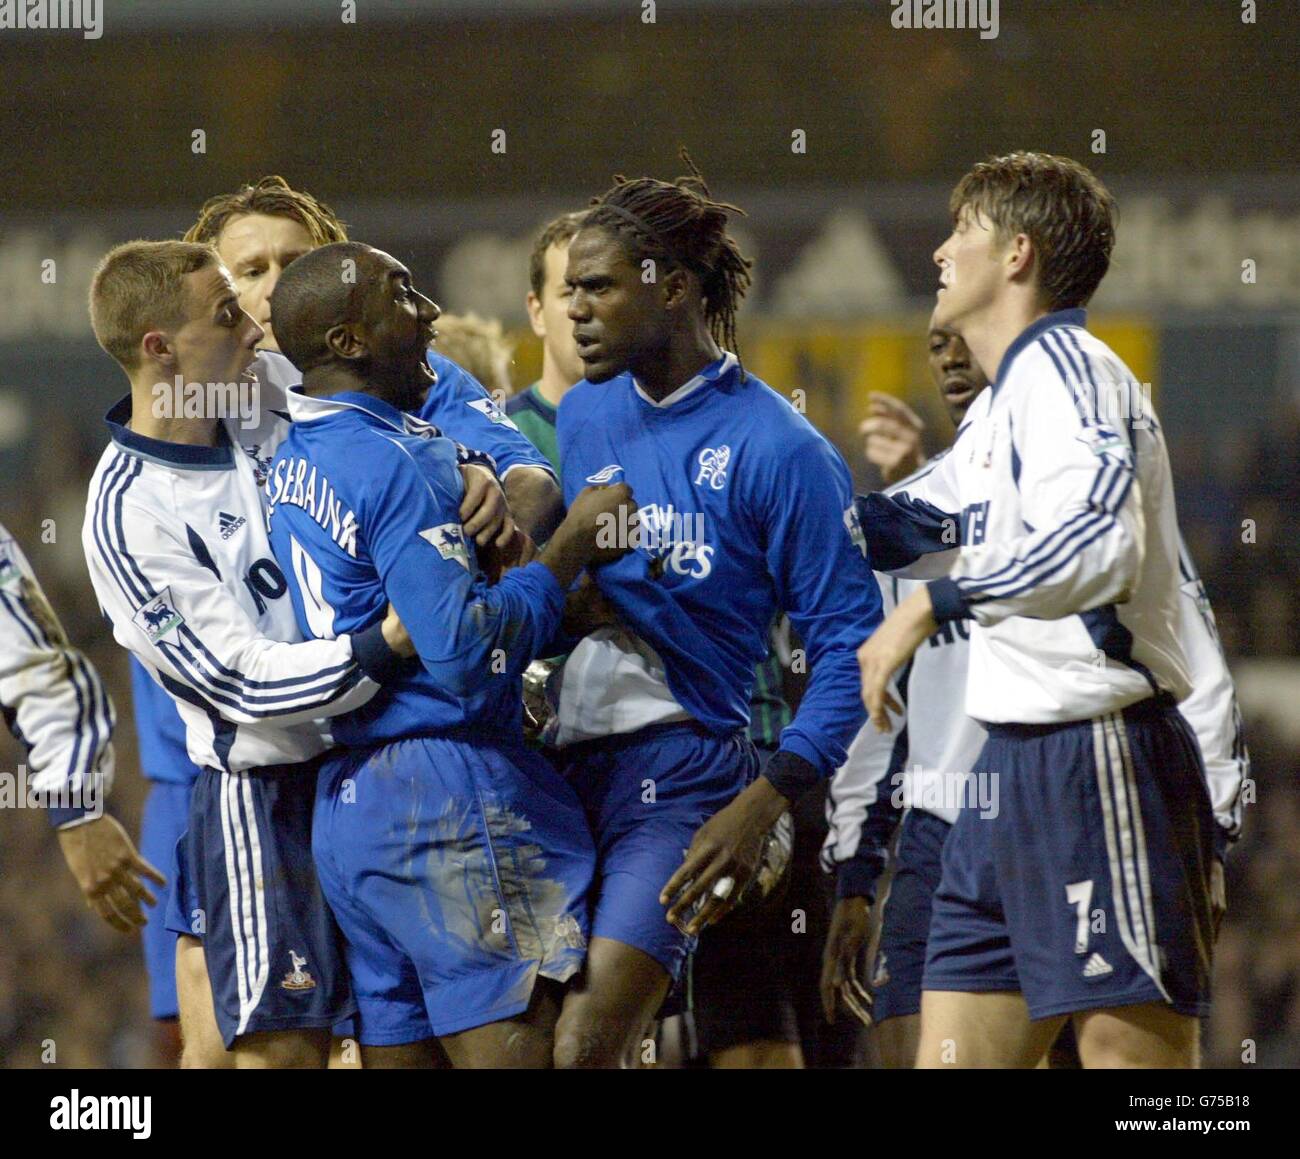 Chelsea's Jimmy Floyd Hasselbaink is restrained by his team-mate shortly before Jimmy Floyd Hasselbaink was red carded. After 55 minutes, Hasselbaink fouled Sullivan and that sparked a melee inside the Spurs box. * Referee Mark Halsey brandished the red card at the big striker for pushing Sheringham in the face but he got the wrong Dutchman as Mario Melchiot was the real offender, during their Worthington Cup semi-final, 2nd leg match at Tottenham's, White Hart Lane ground. Stock Photo